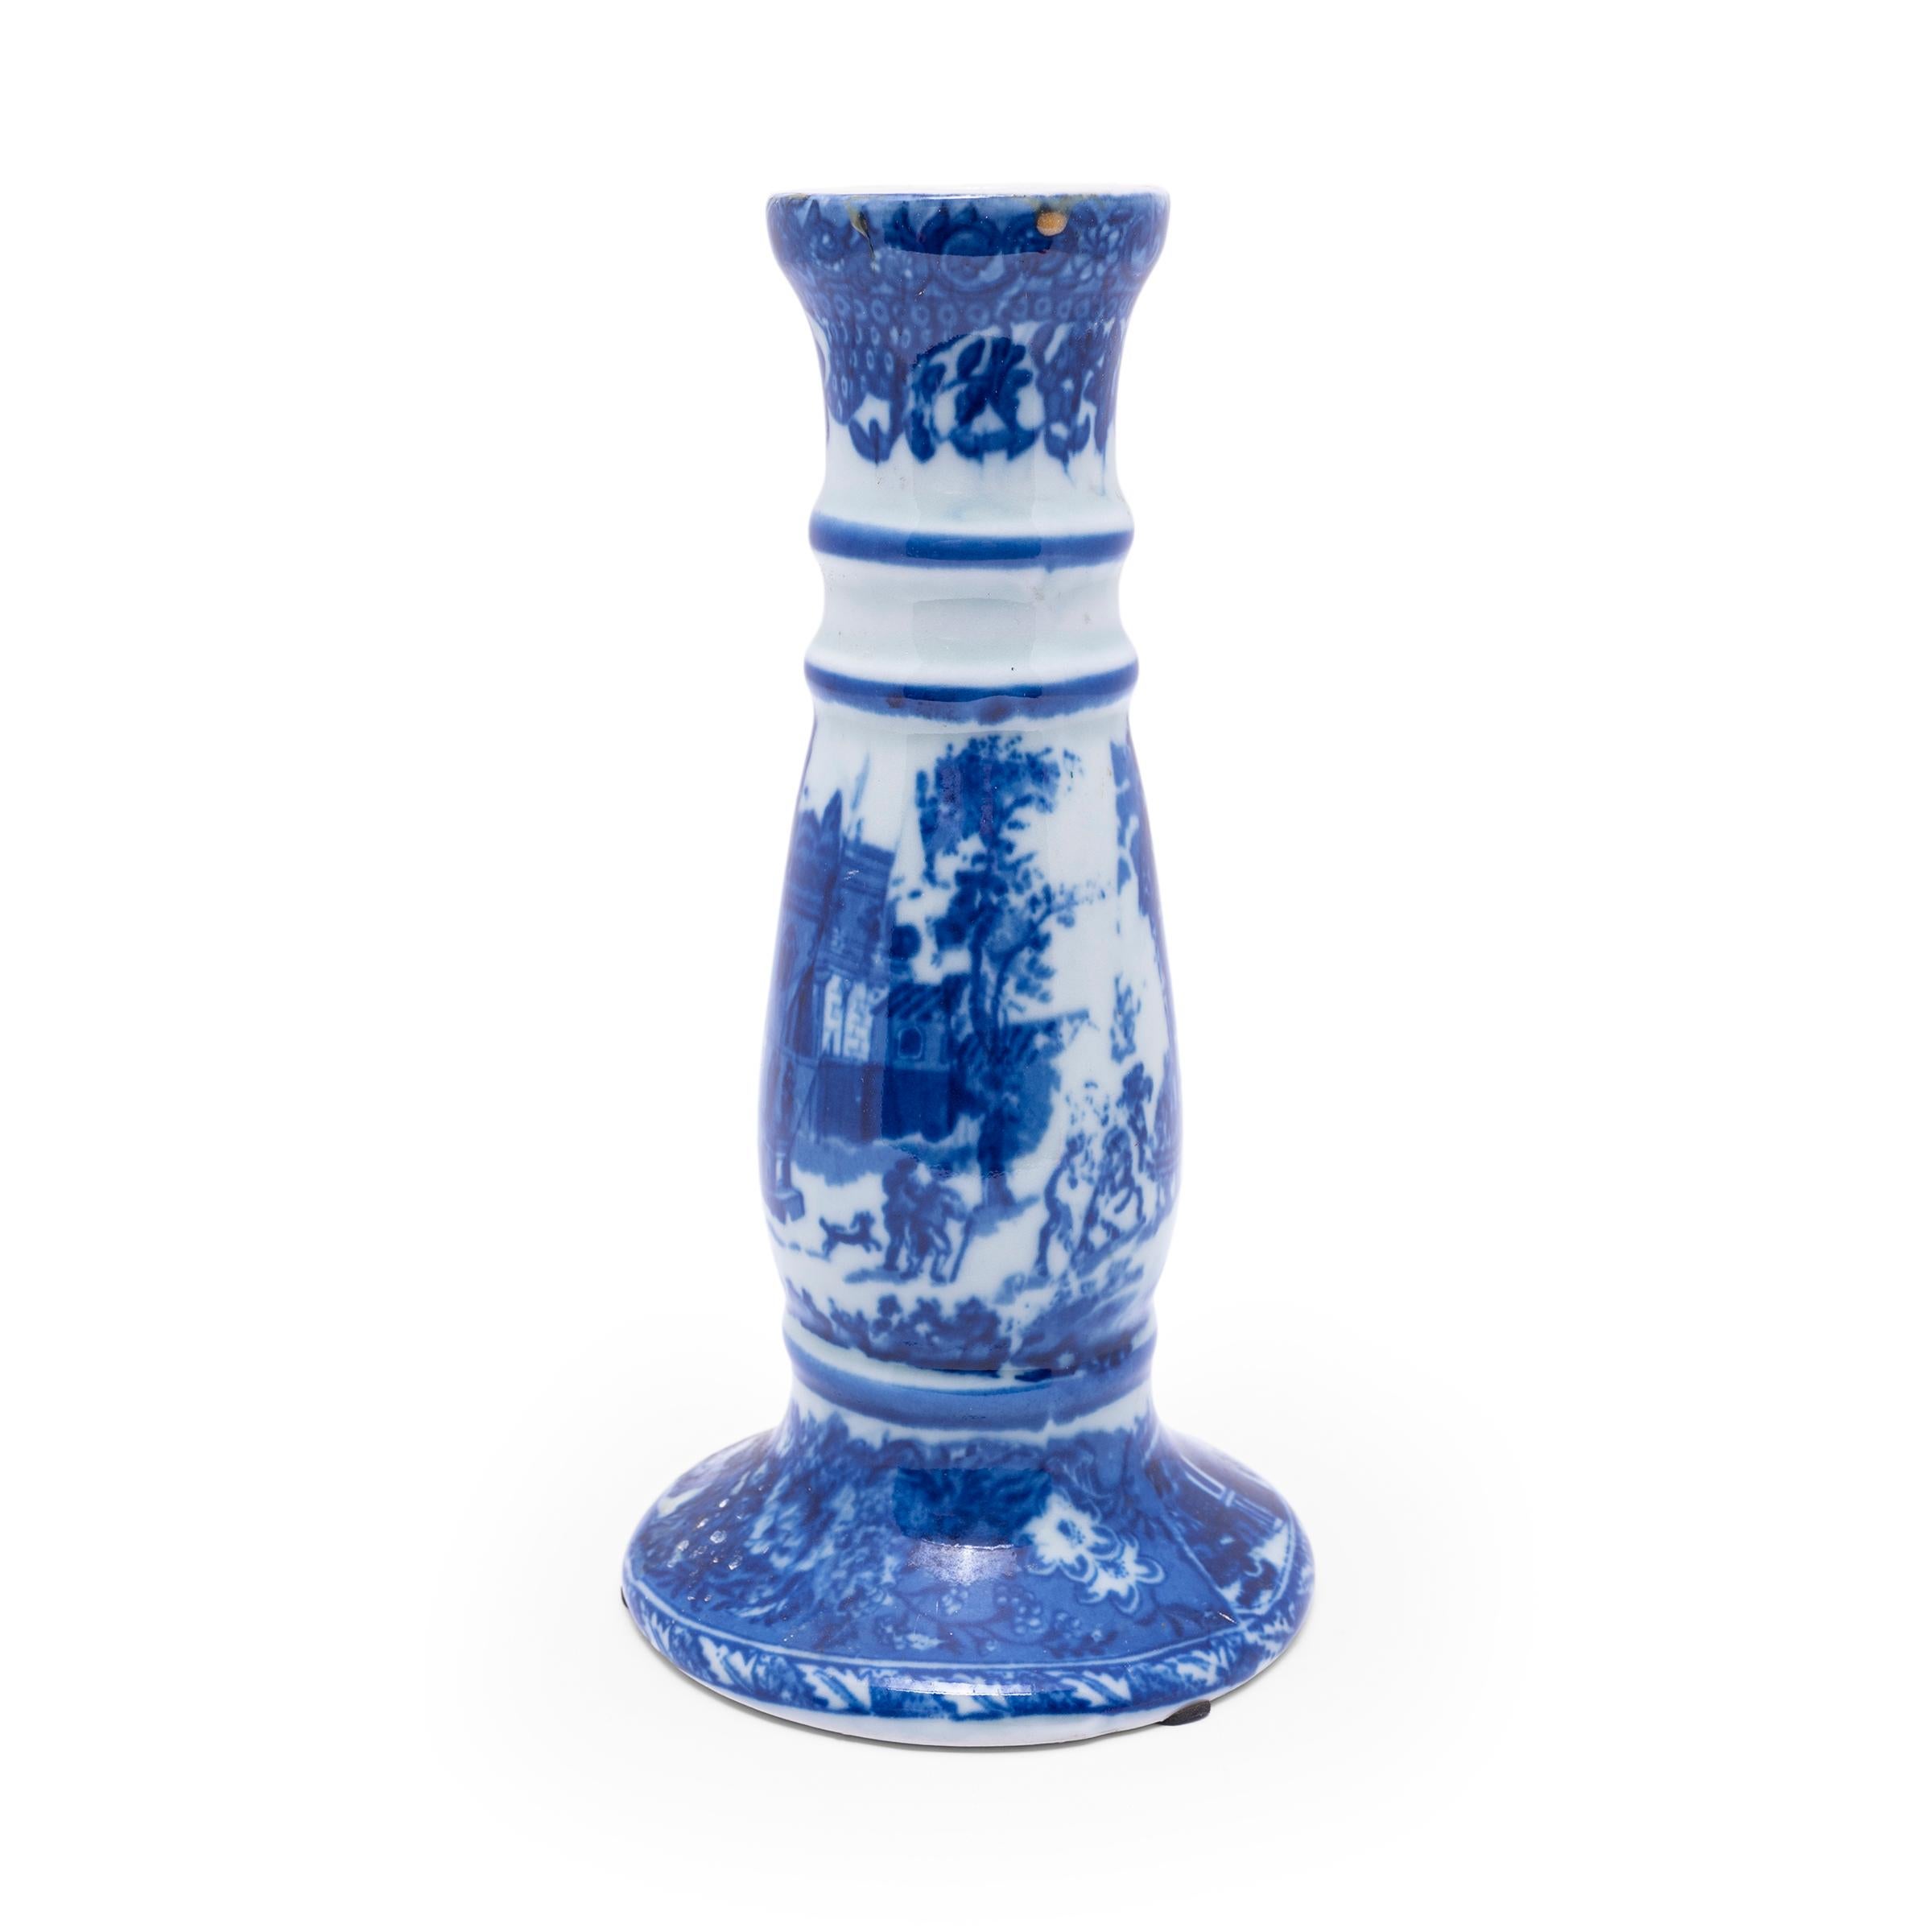 This vintage porcelain vase is shaped like a large candle stand and decorated with a blue-and-white Chinoiserie design of an idyllic town square landscape. The transfer ware design recreates Victoria Ironstone wares and features the Royal Arms